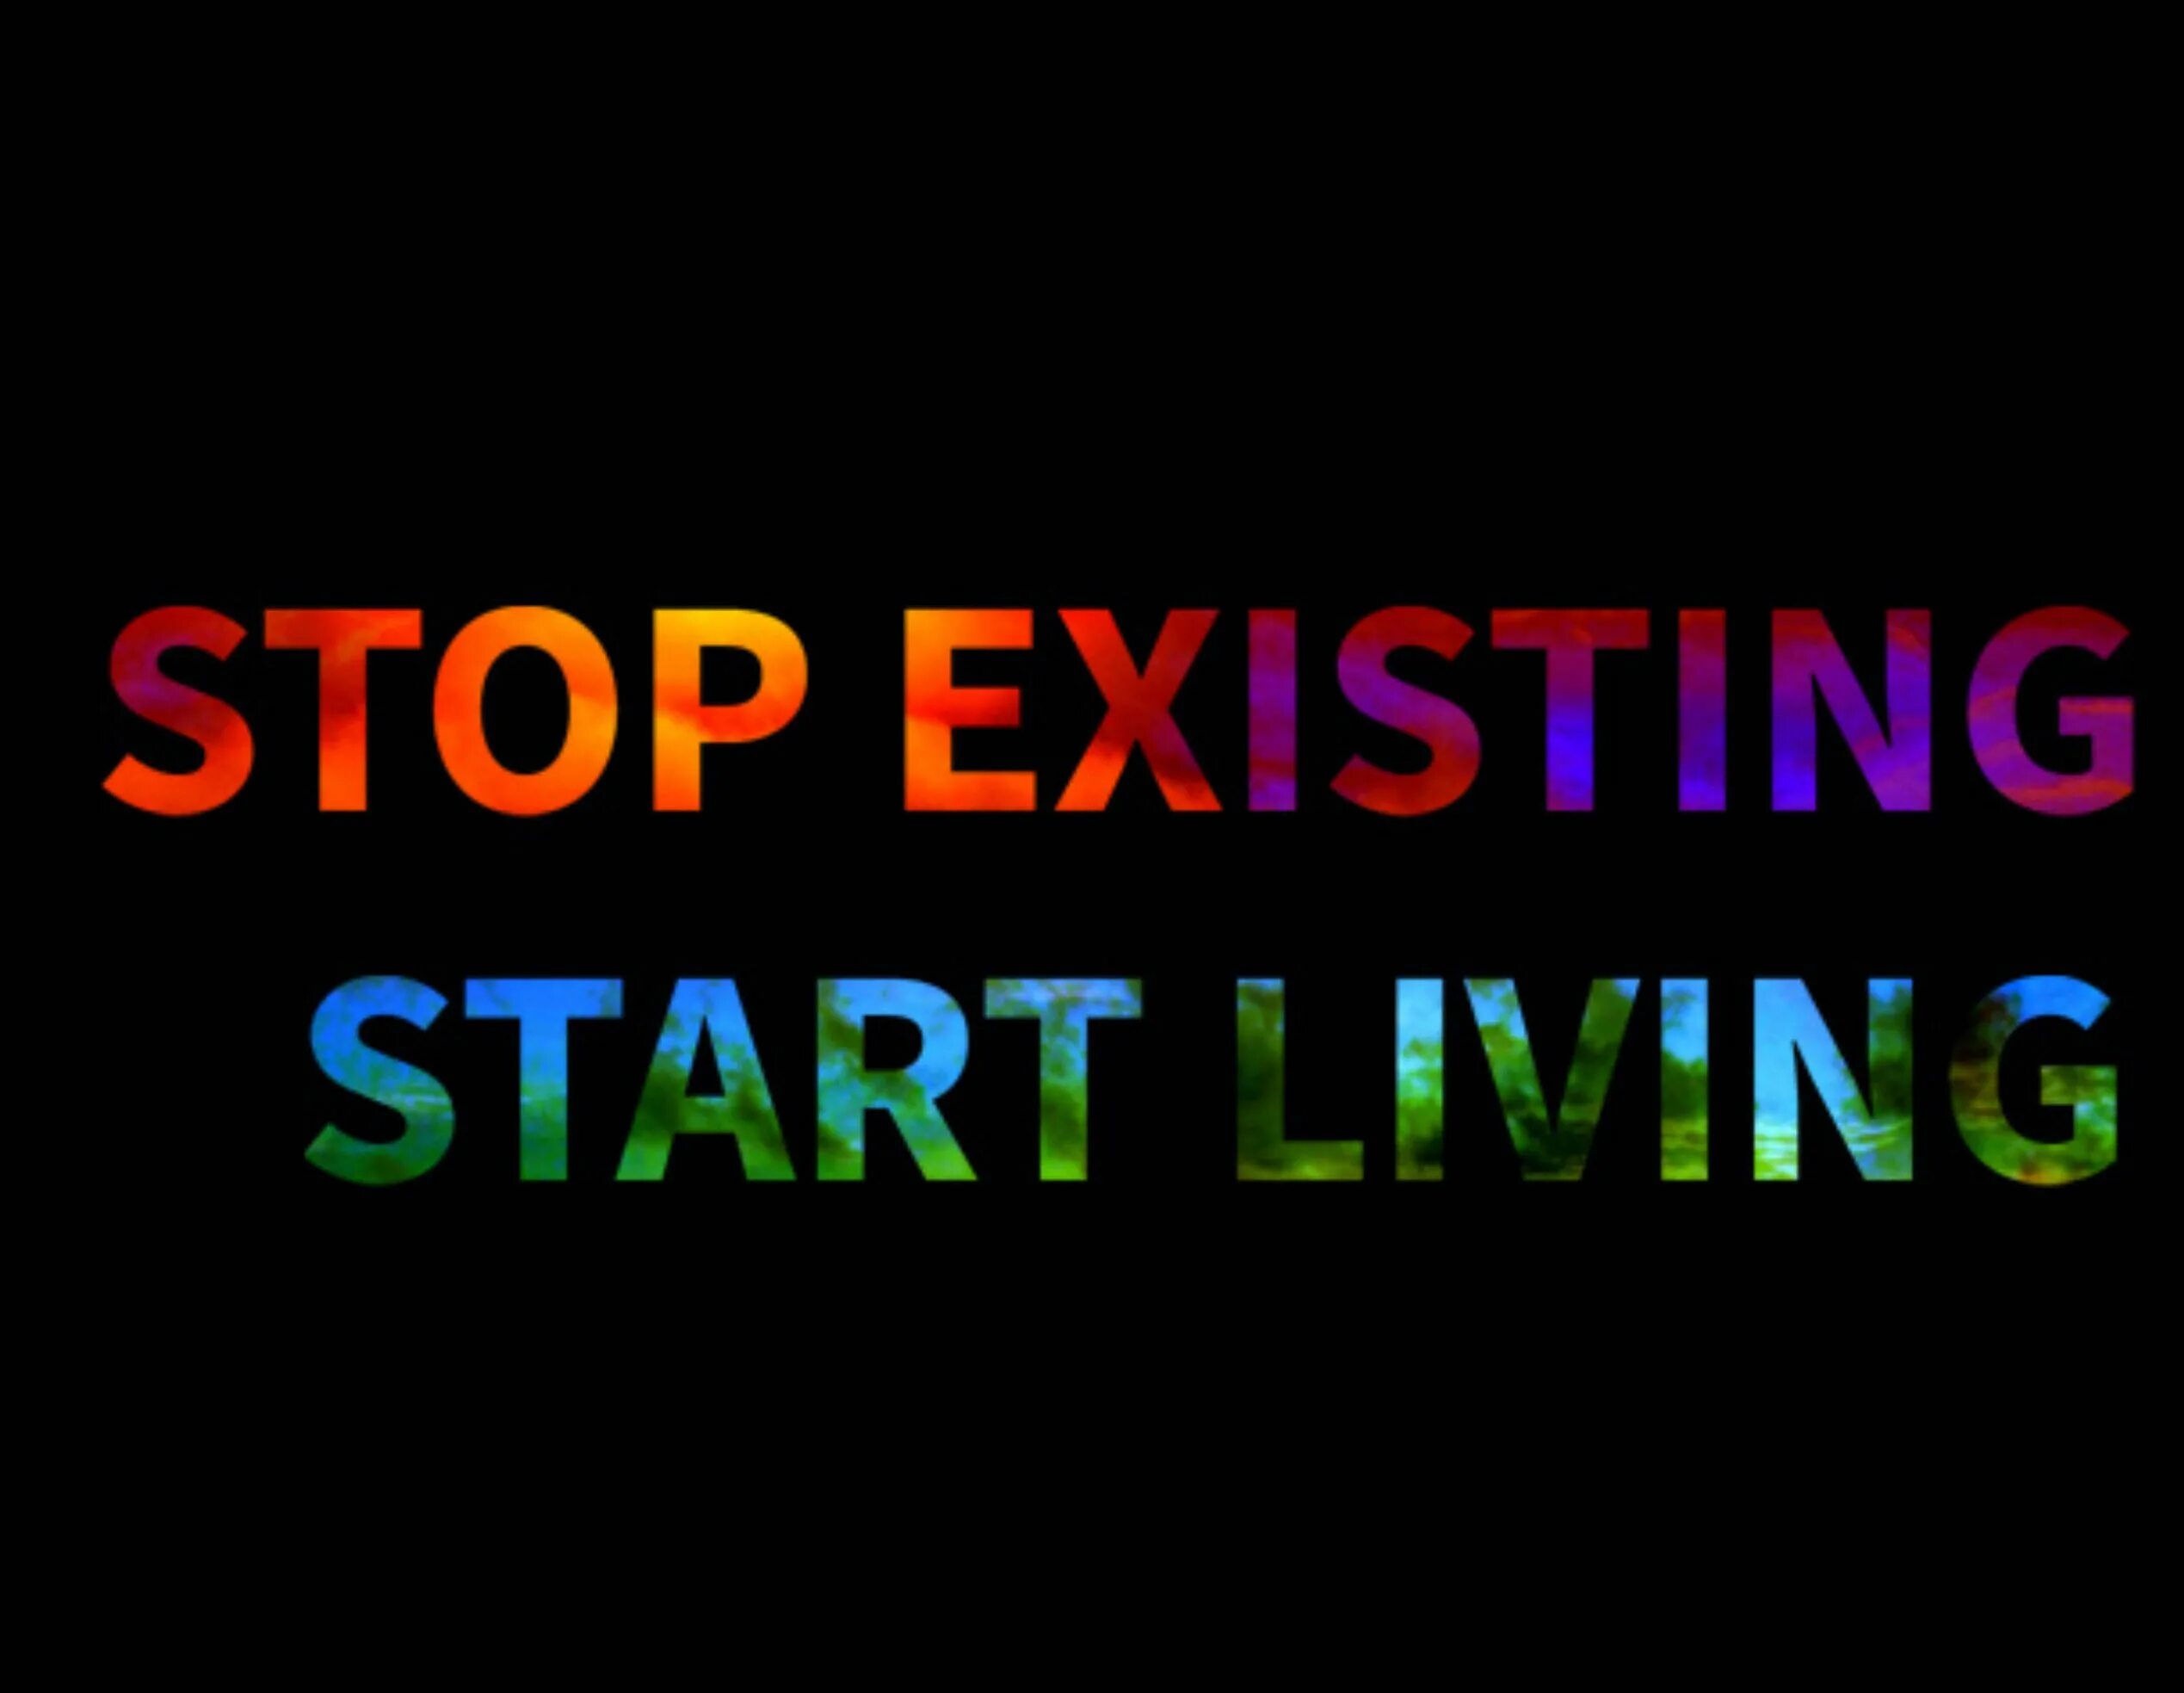 Starting to exist. Stop existing and start Living. Stop just existing. Start Living. Existing. Stop existing and start Living nature.